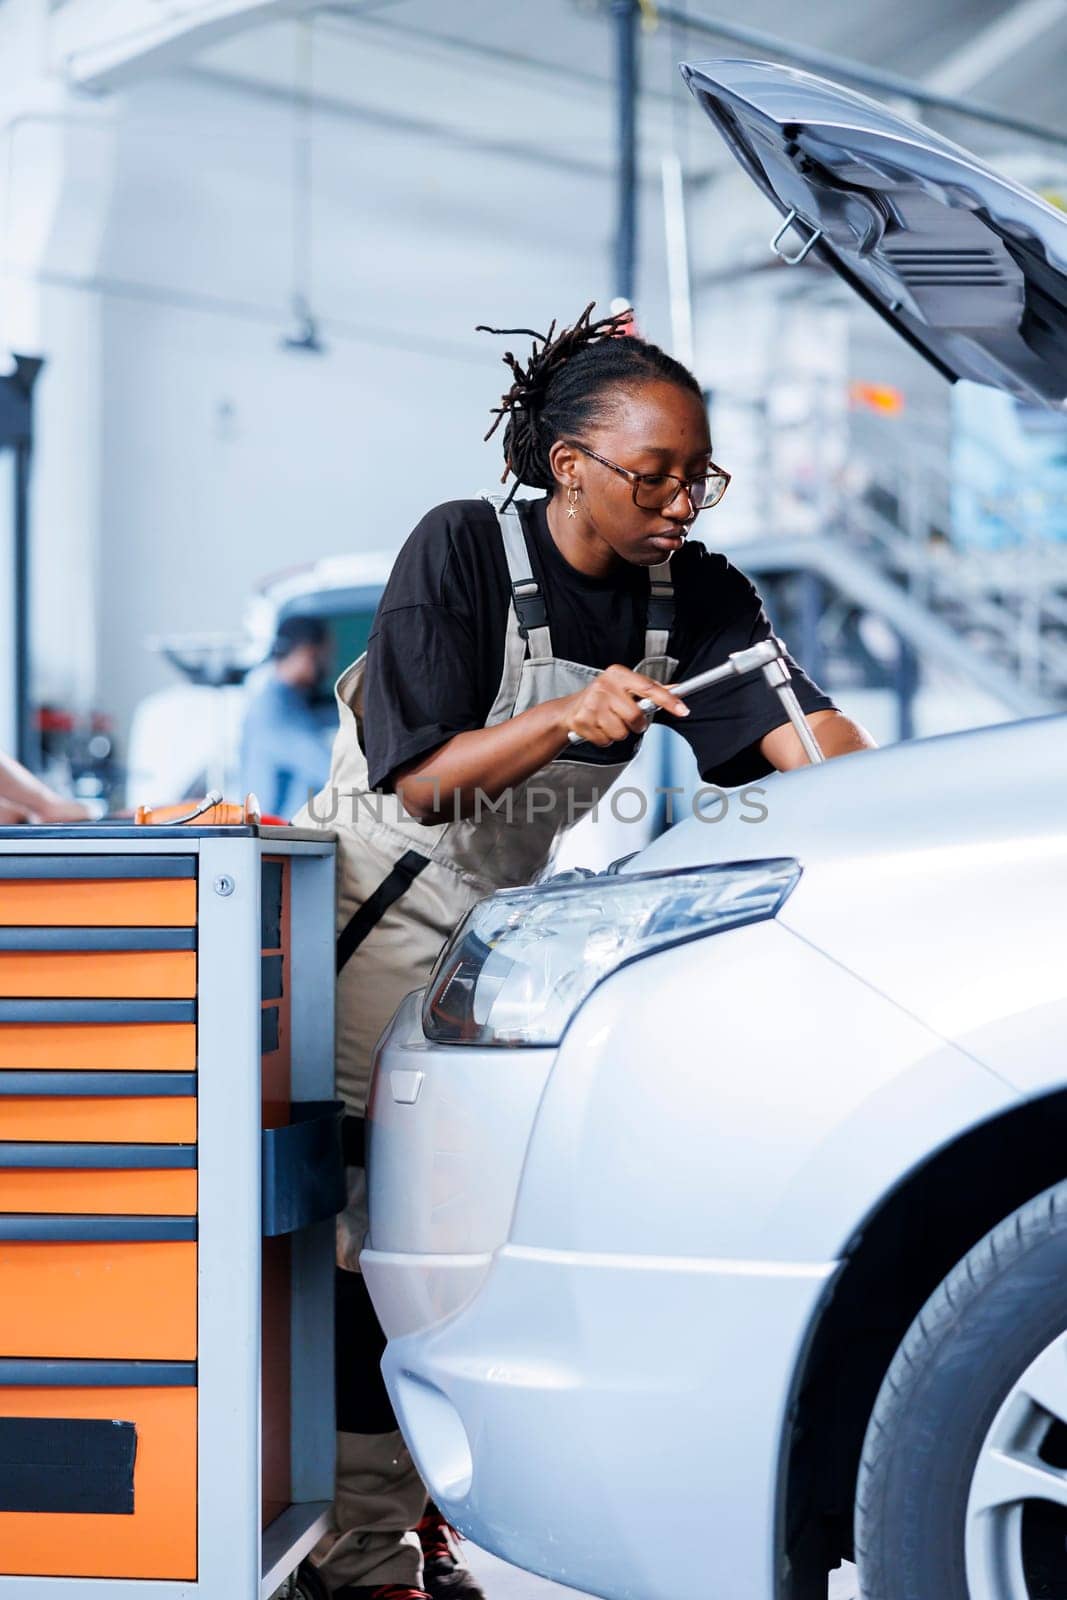 Engineer in car service use torque wrench to tighten bolts after replacing engine. African american skilled auto repair shop employee uses professional tools to fix customer automobile